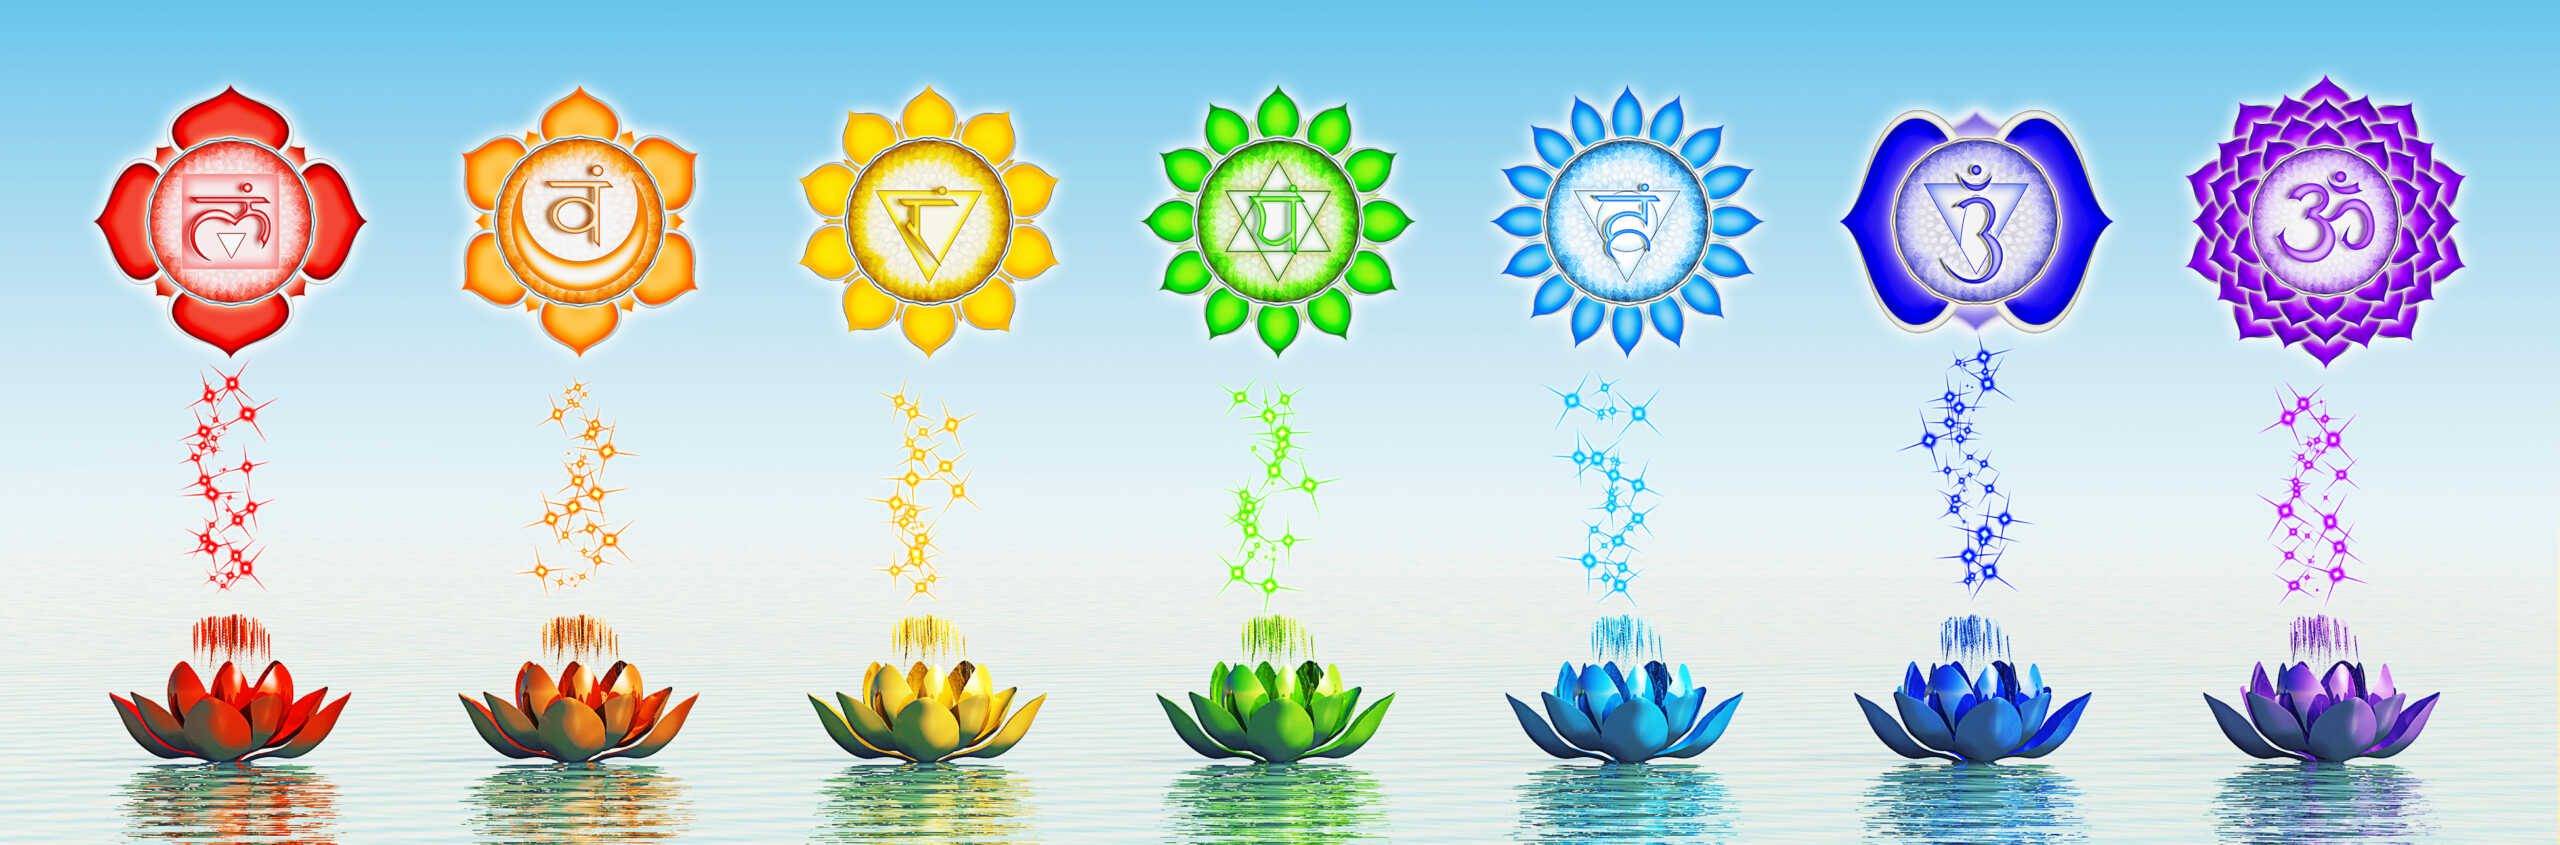 Image of Full Body System Wellness elements, 7 flowers of the colors of the rainbow with energy symbols